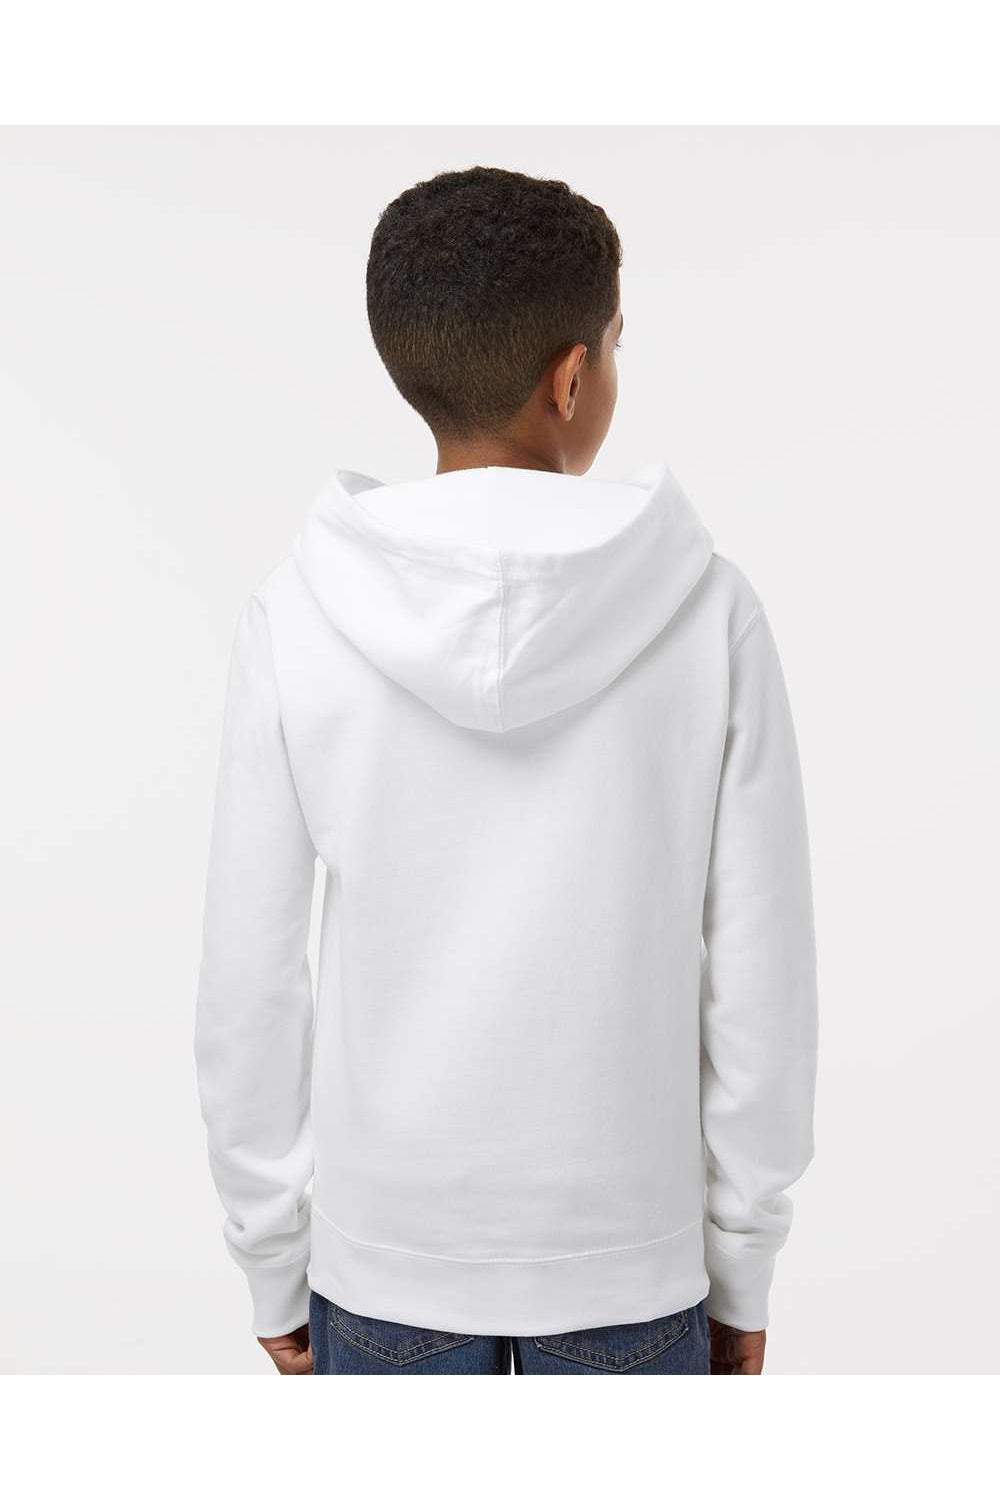 Independent Trading Co. SS4001Y Youth Hooded Sweatshirt Hoodie White Model Back